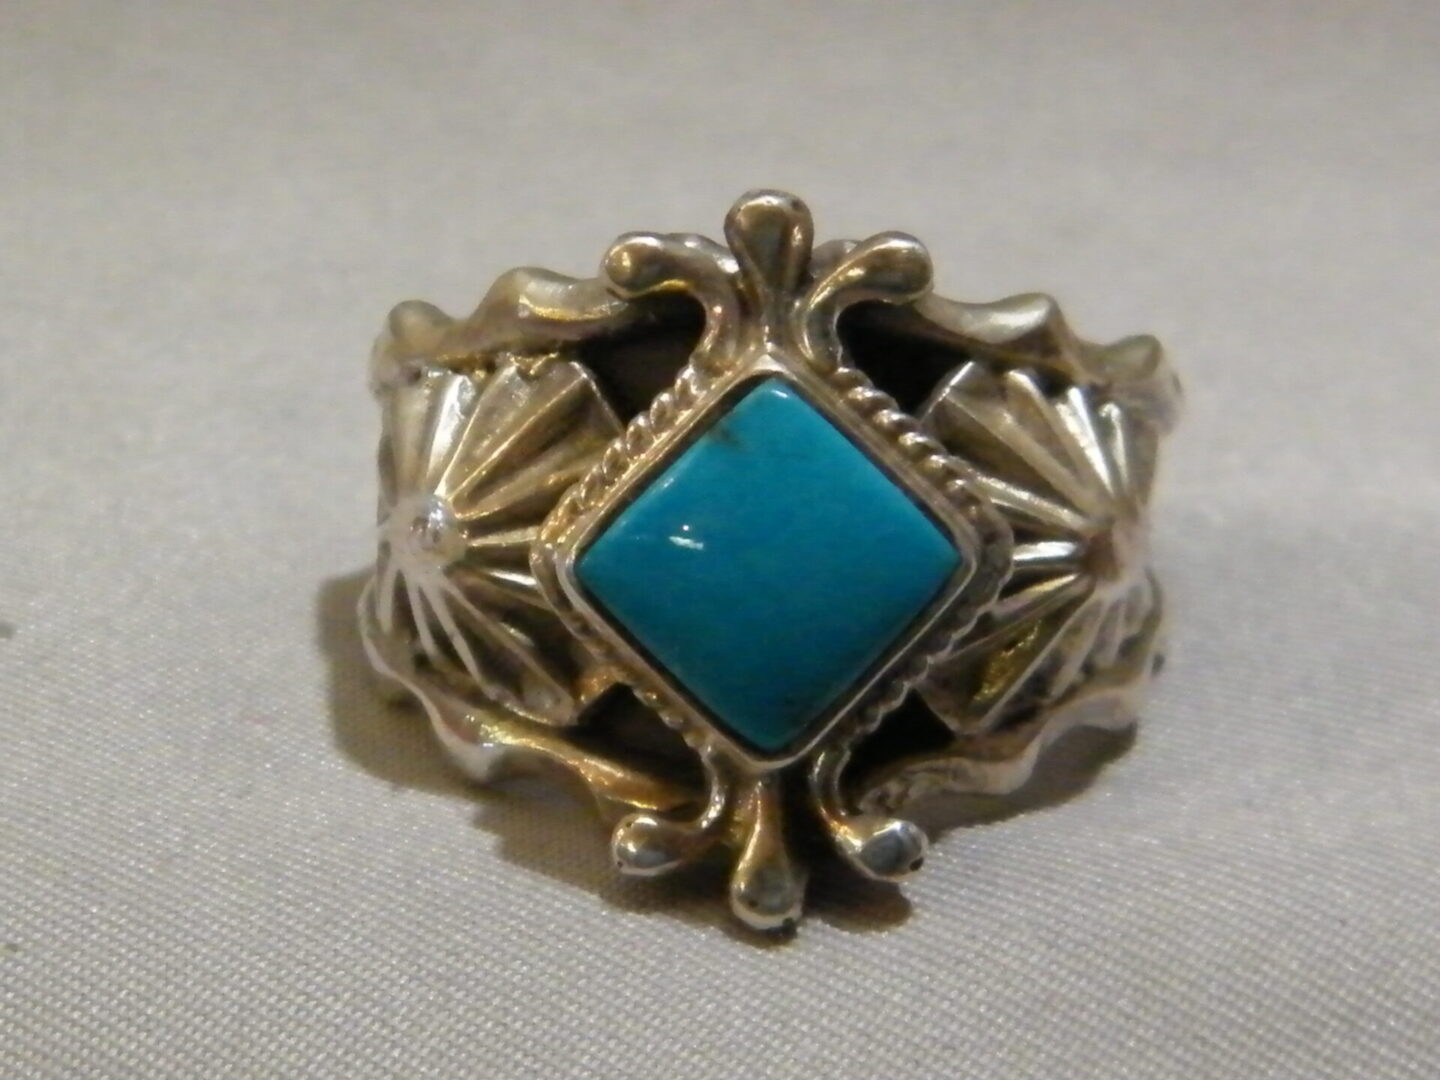 A Gold Ring With a Diamond Shaped Blue Stone